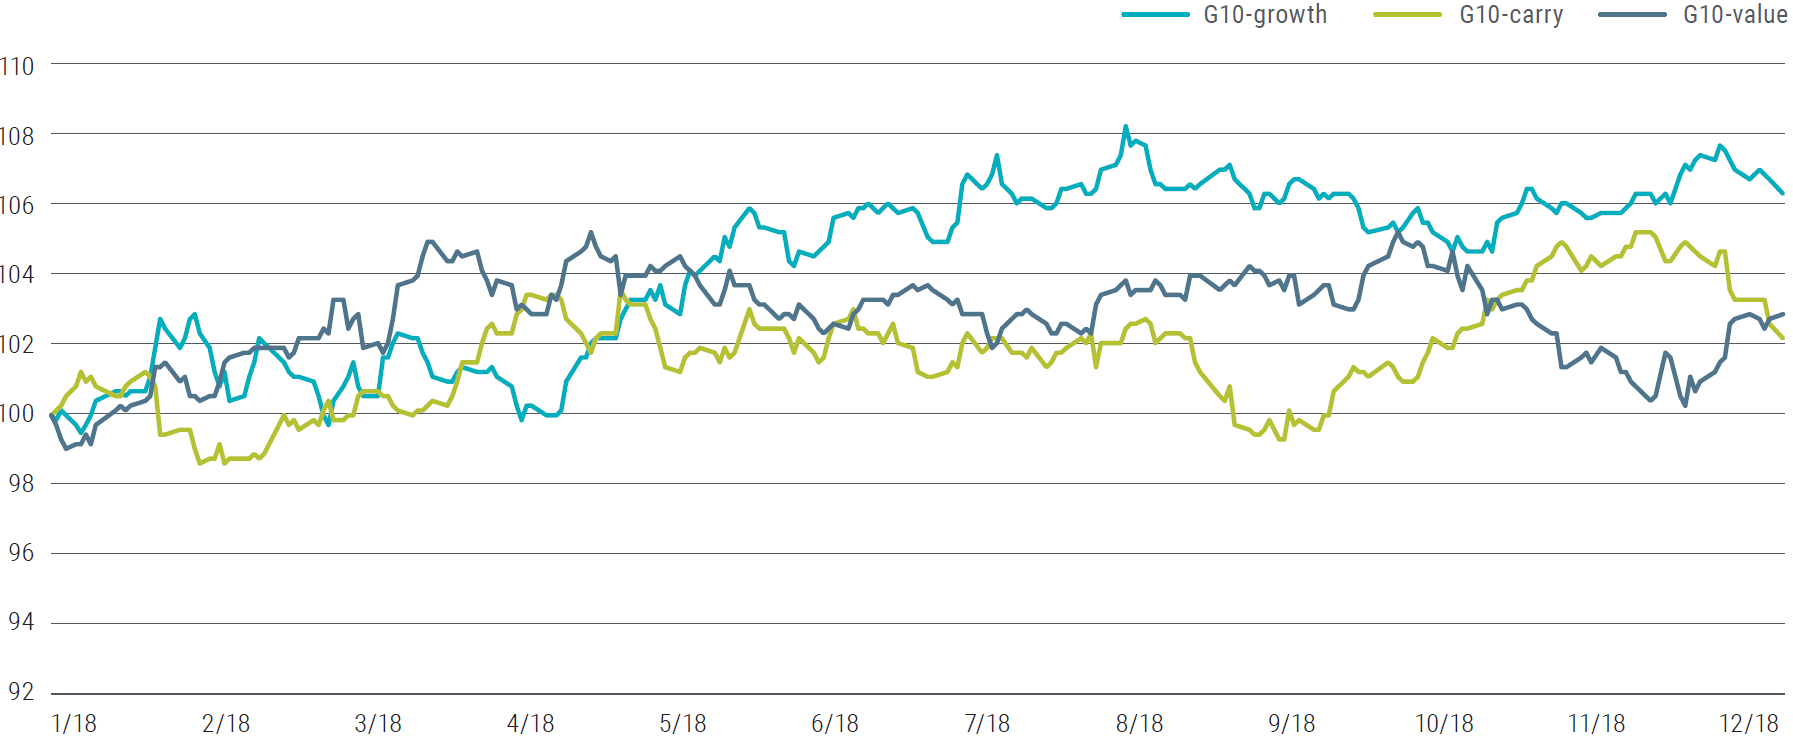 Figure 10 shows a graph of three kinds of G10 currency strategies, G10-growth, G10-carry, and G10-value over 2018. Indexed at 100 in January 2018, the three diverge over the year, with G10-growth ending the year at 106, G10-value at around 103, and G-10 carry at 102